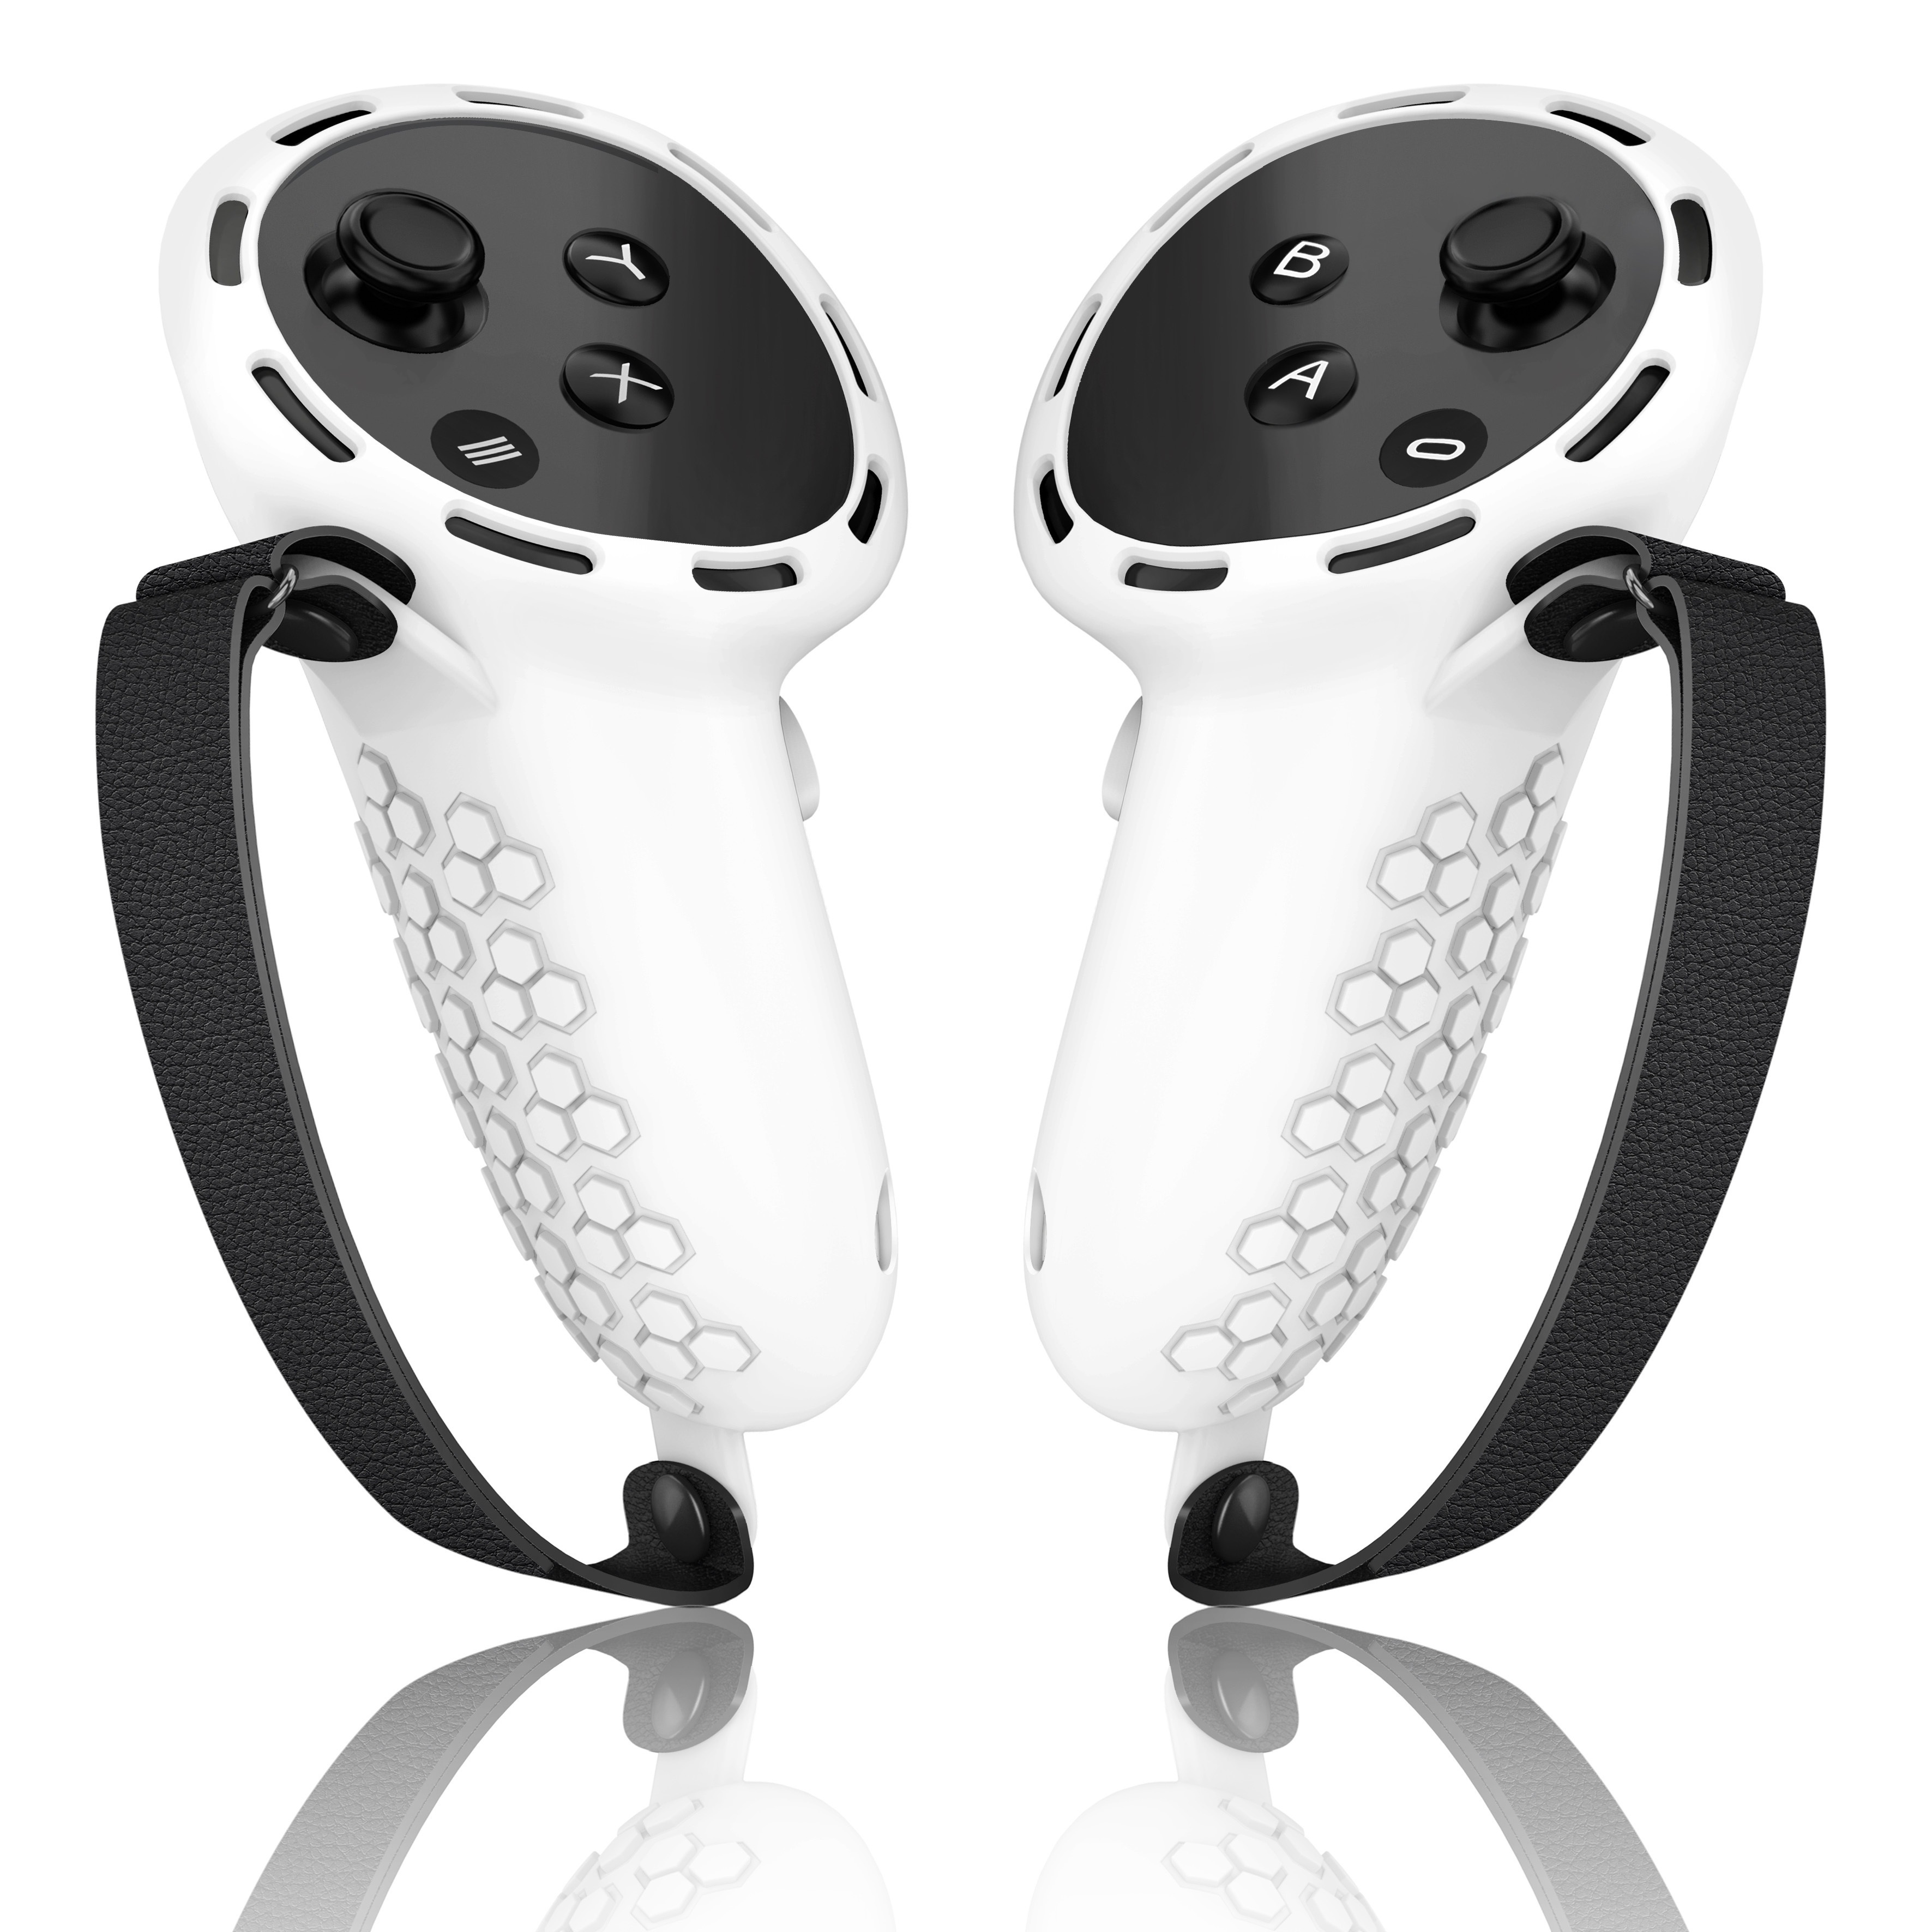  AMVR Controller Grips Compatible with Meta/Oculus